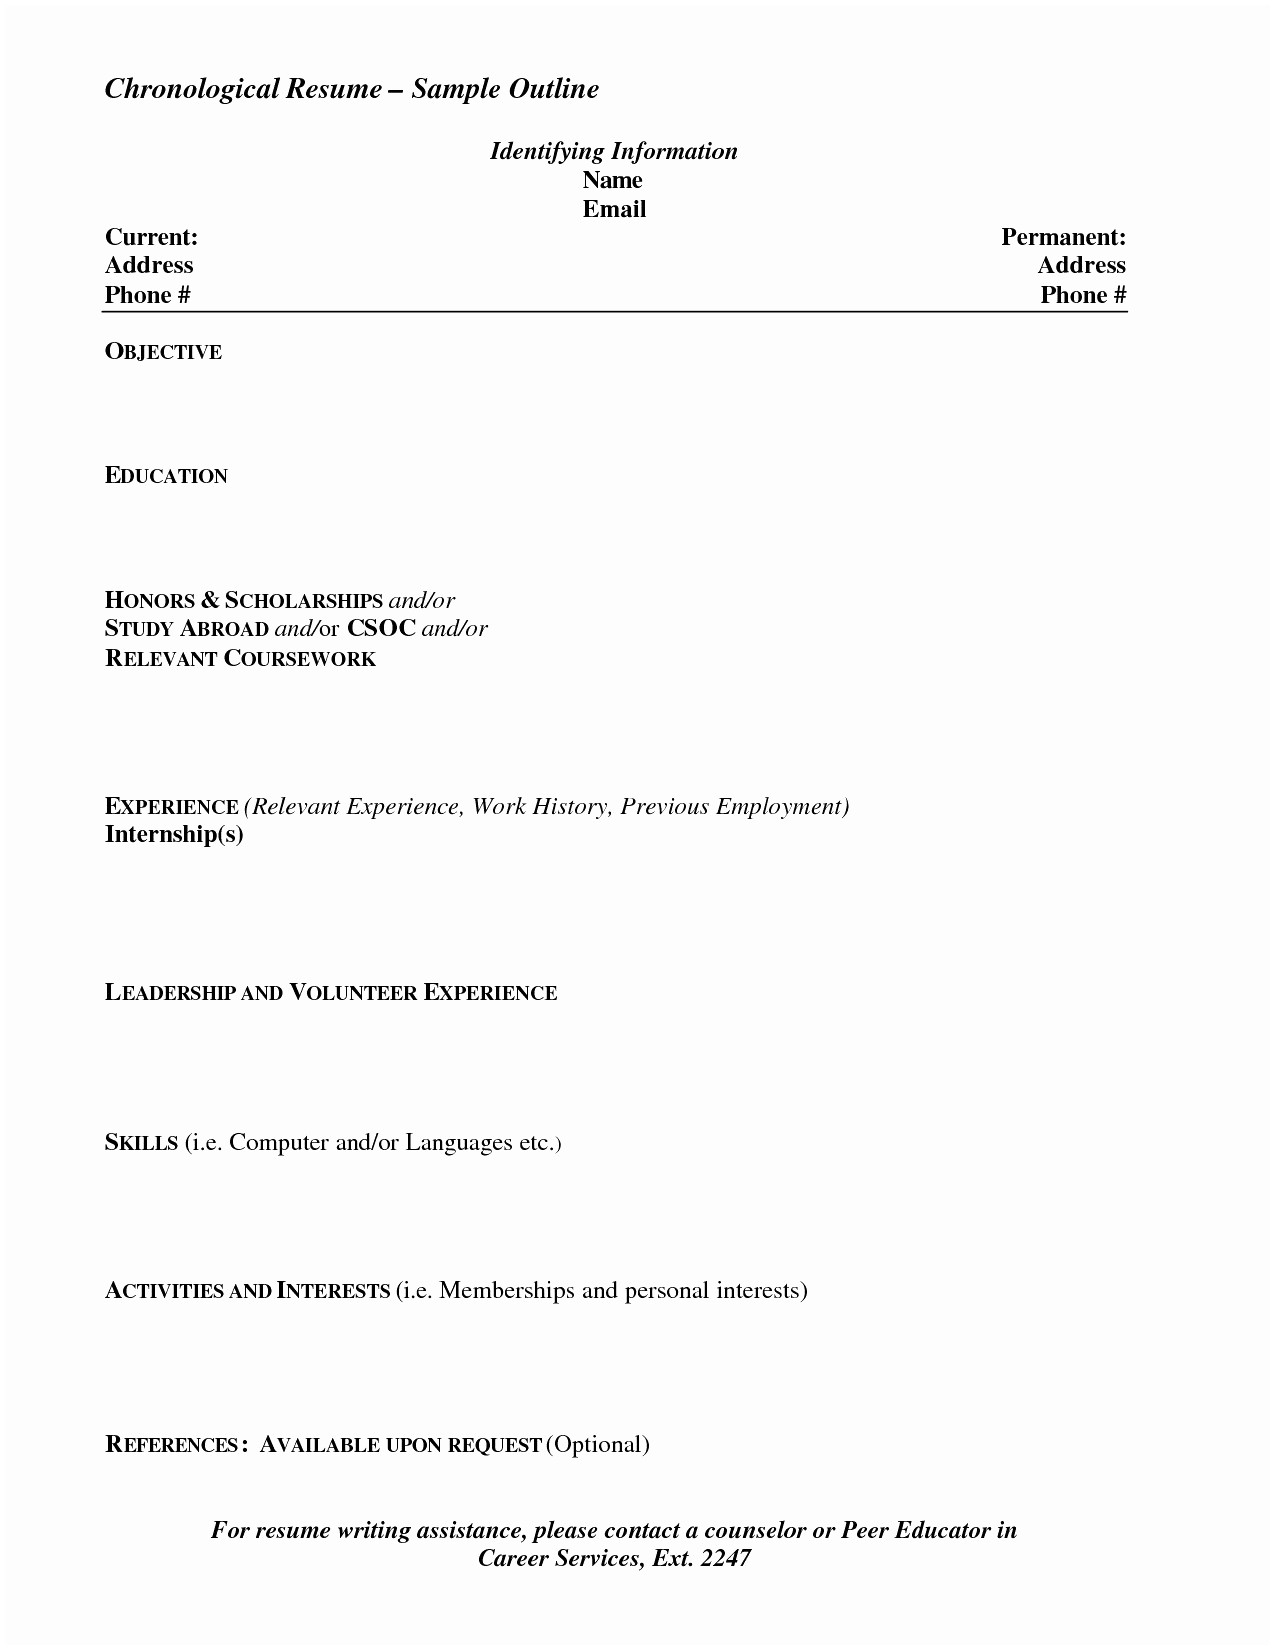 Letter Of Intent Template Free - Letter Intent to Purchase A Business